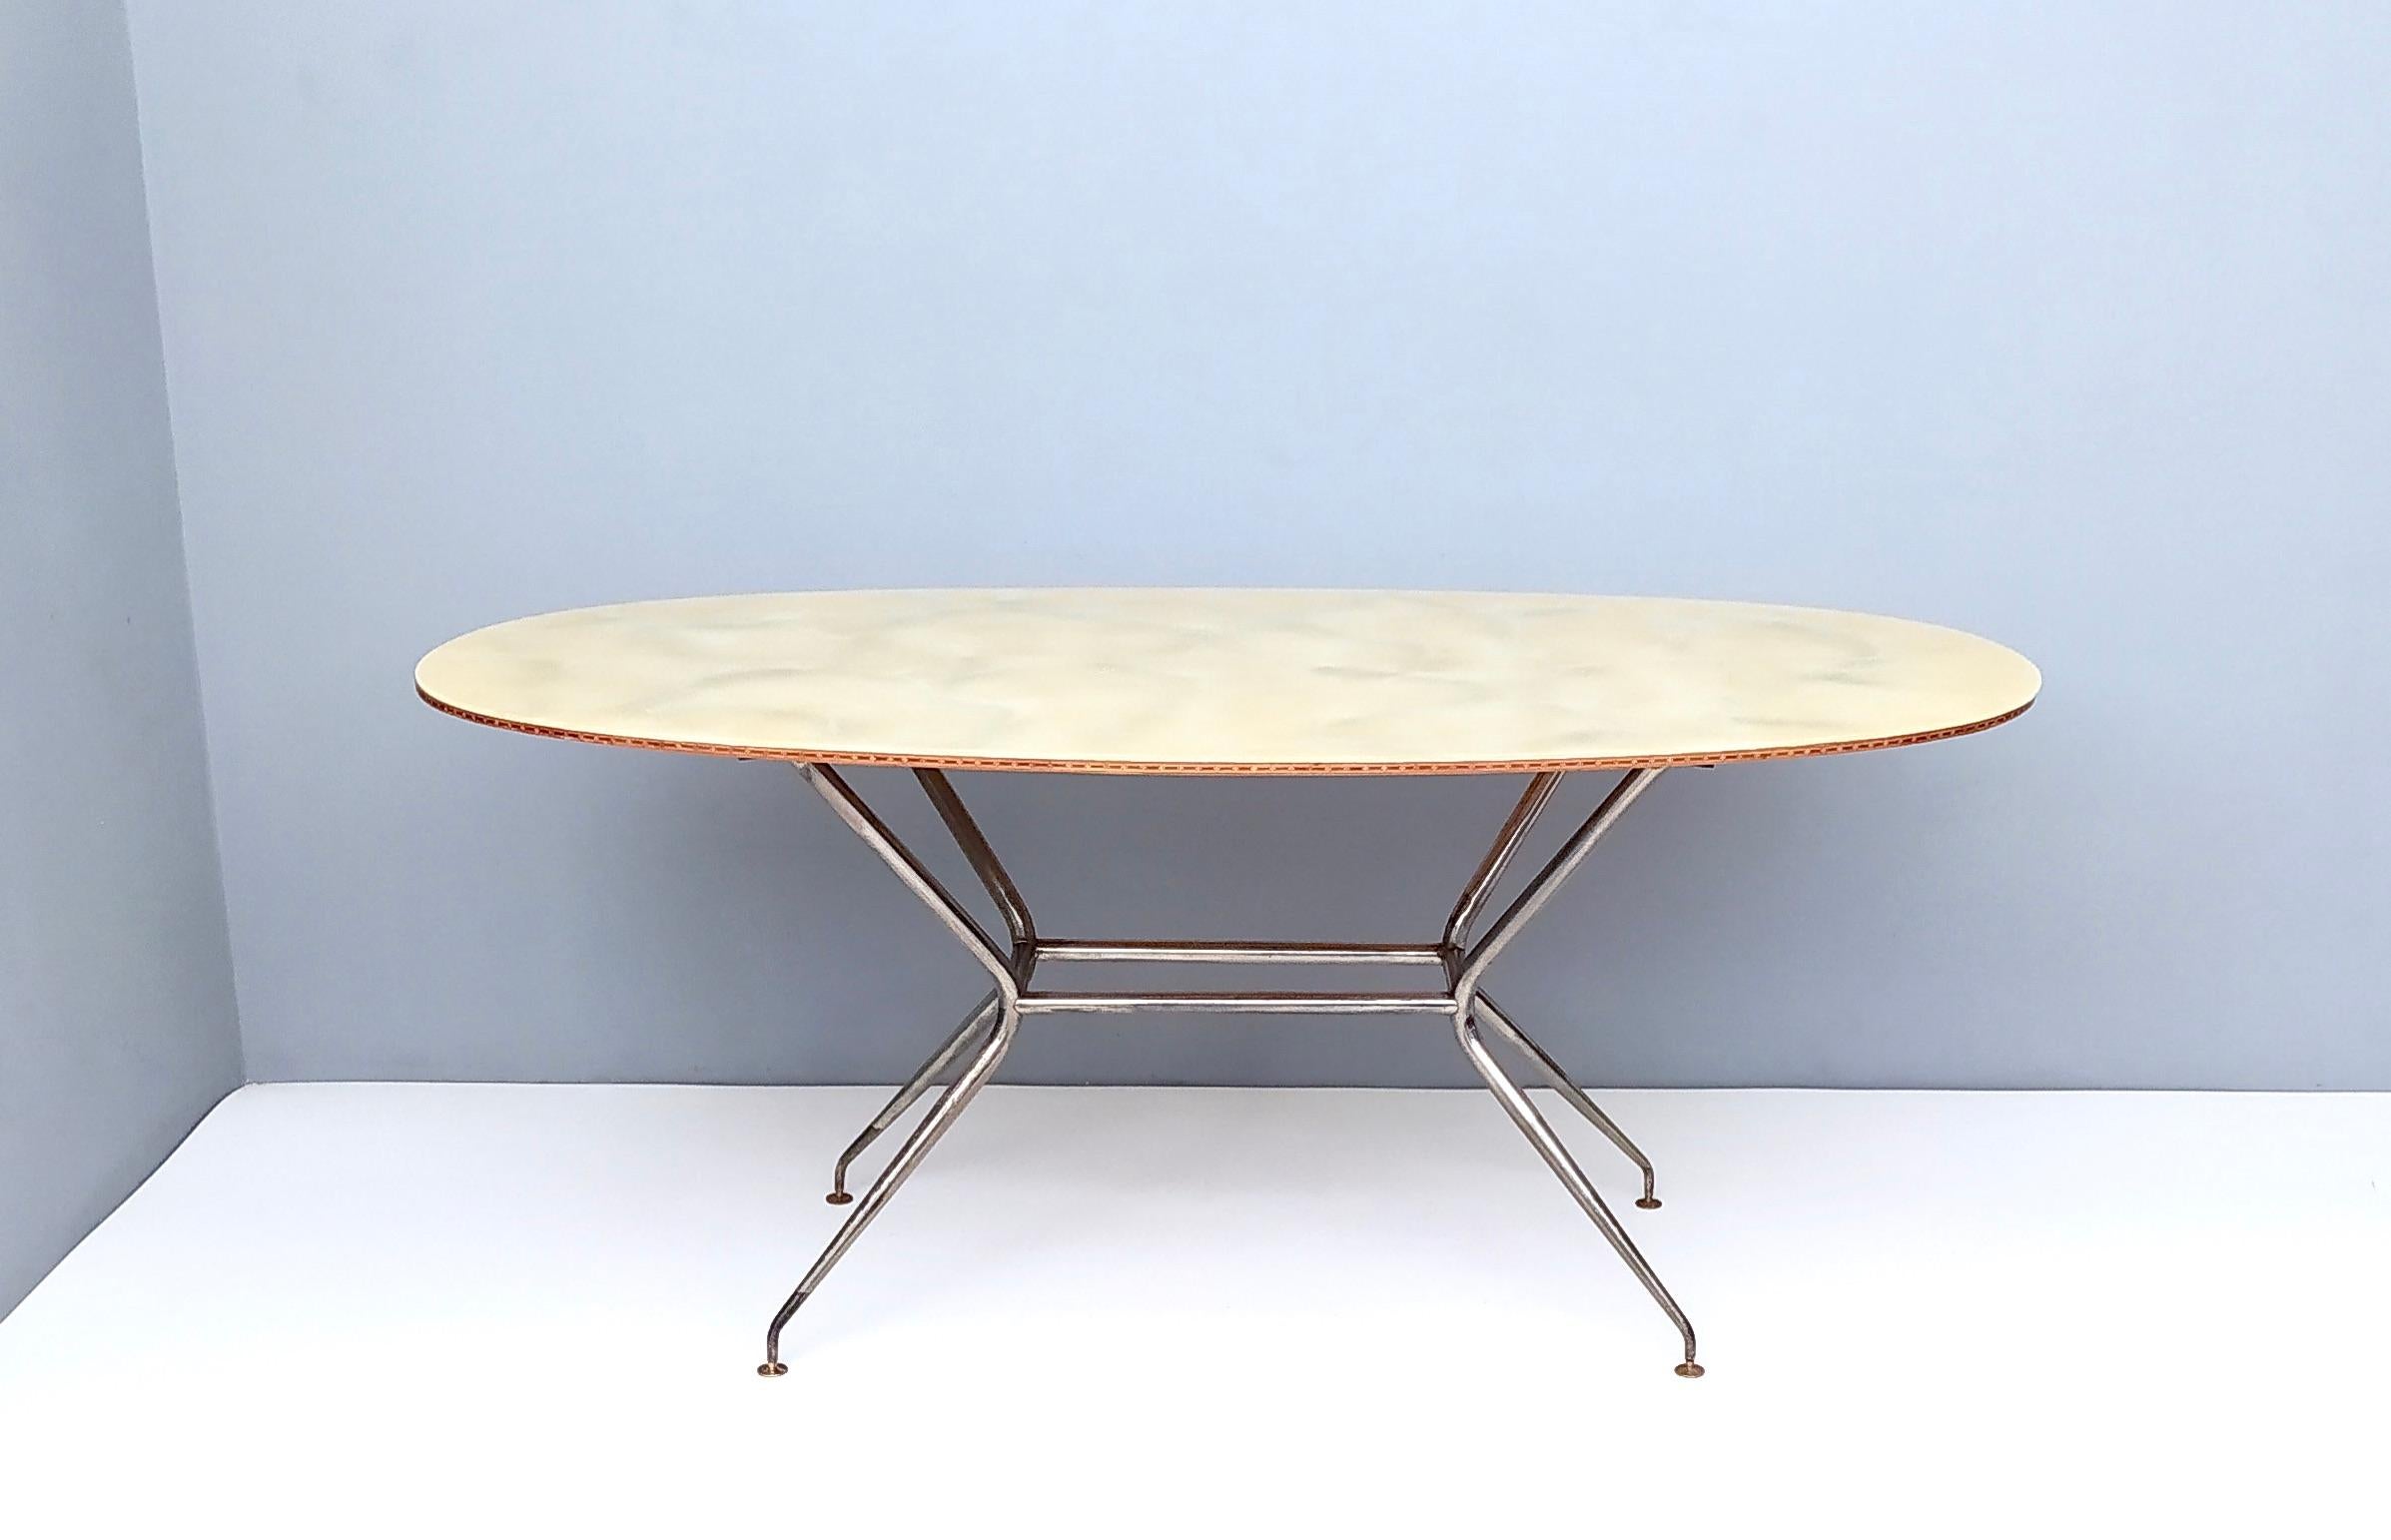 Italian Vintage Wooden and Iron Dining Table with an Oval Glass Top, Italy